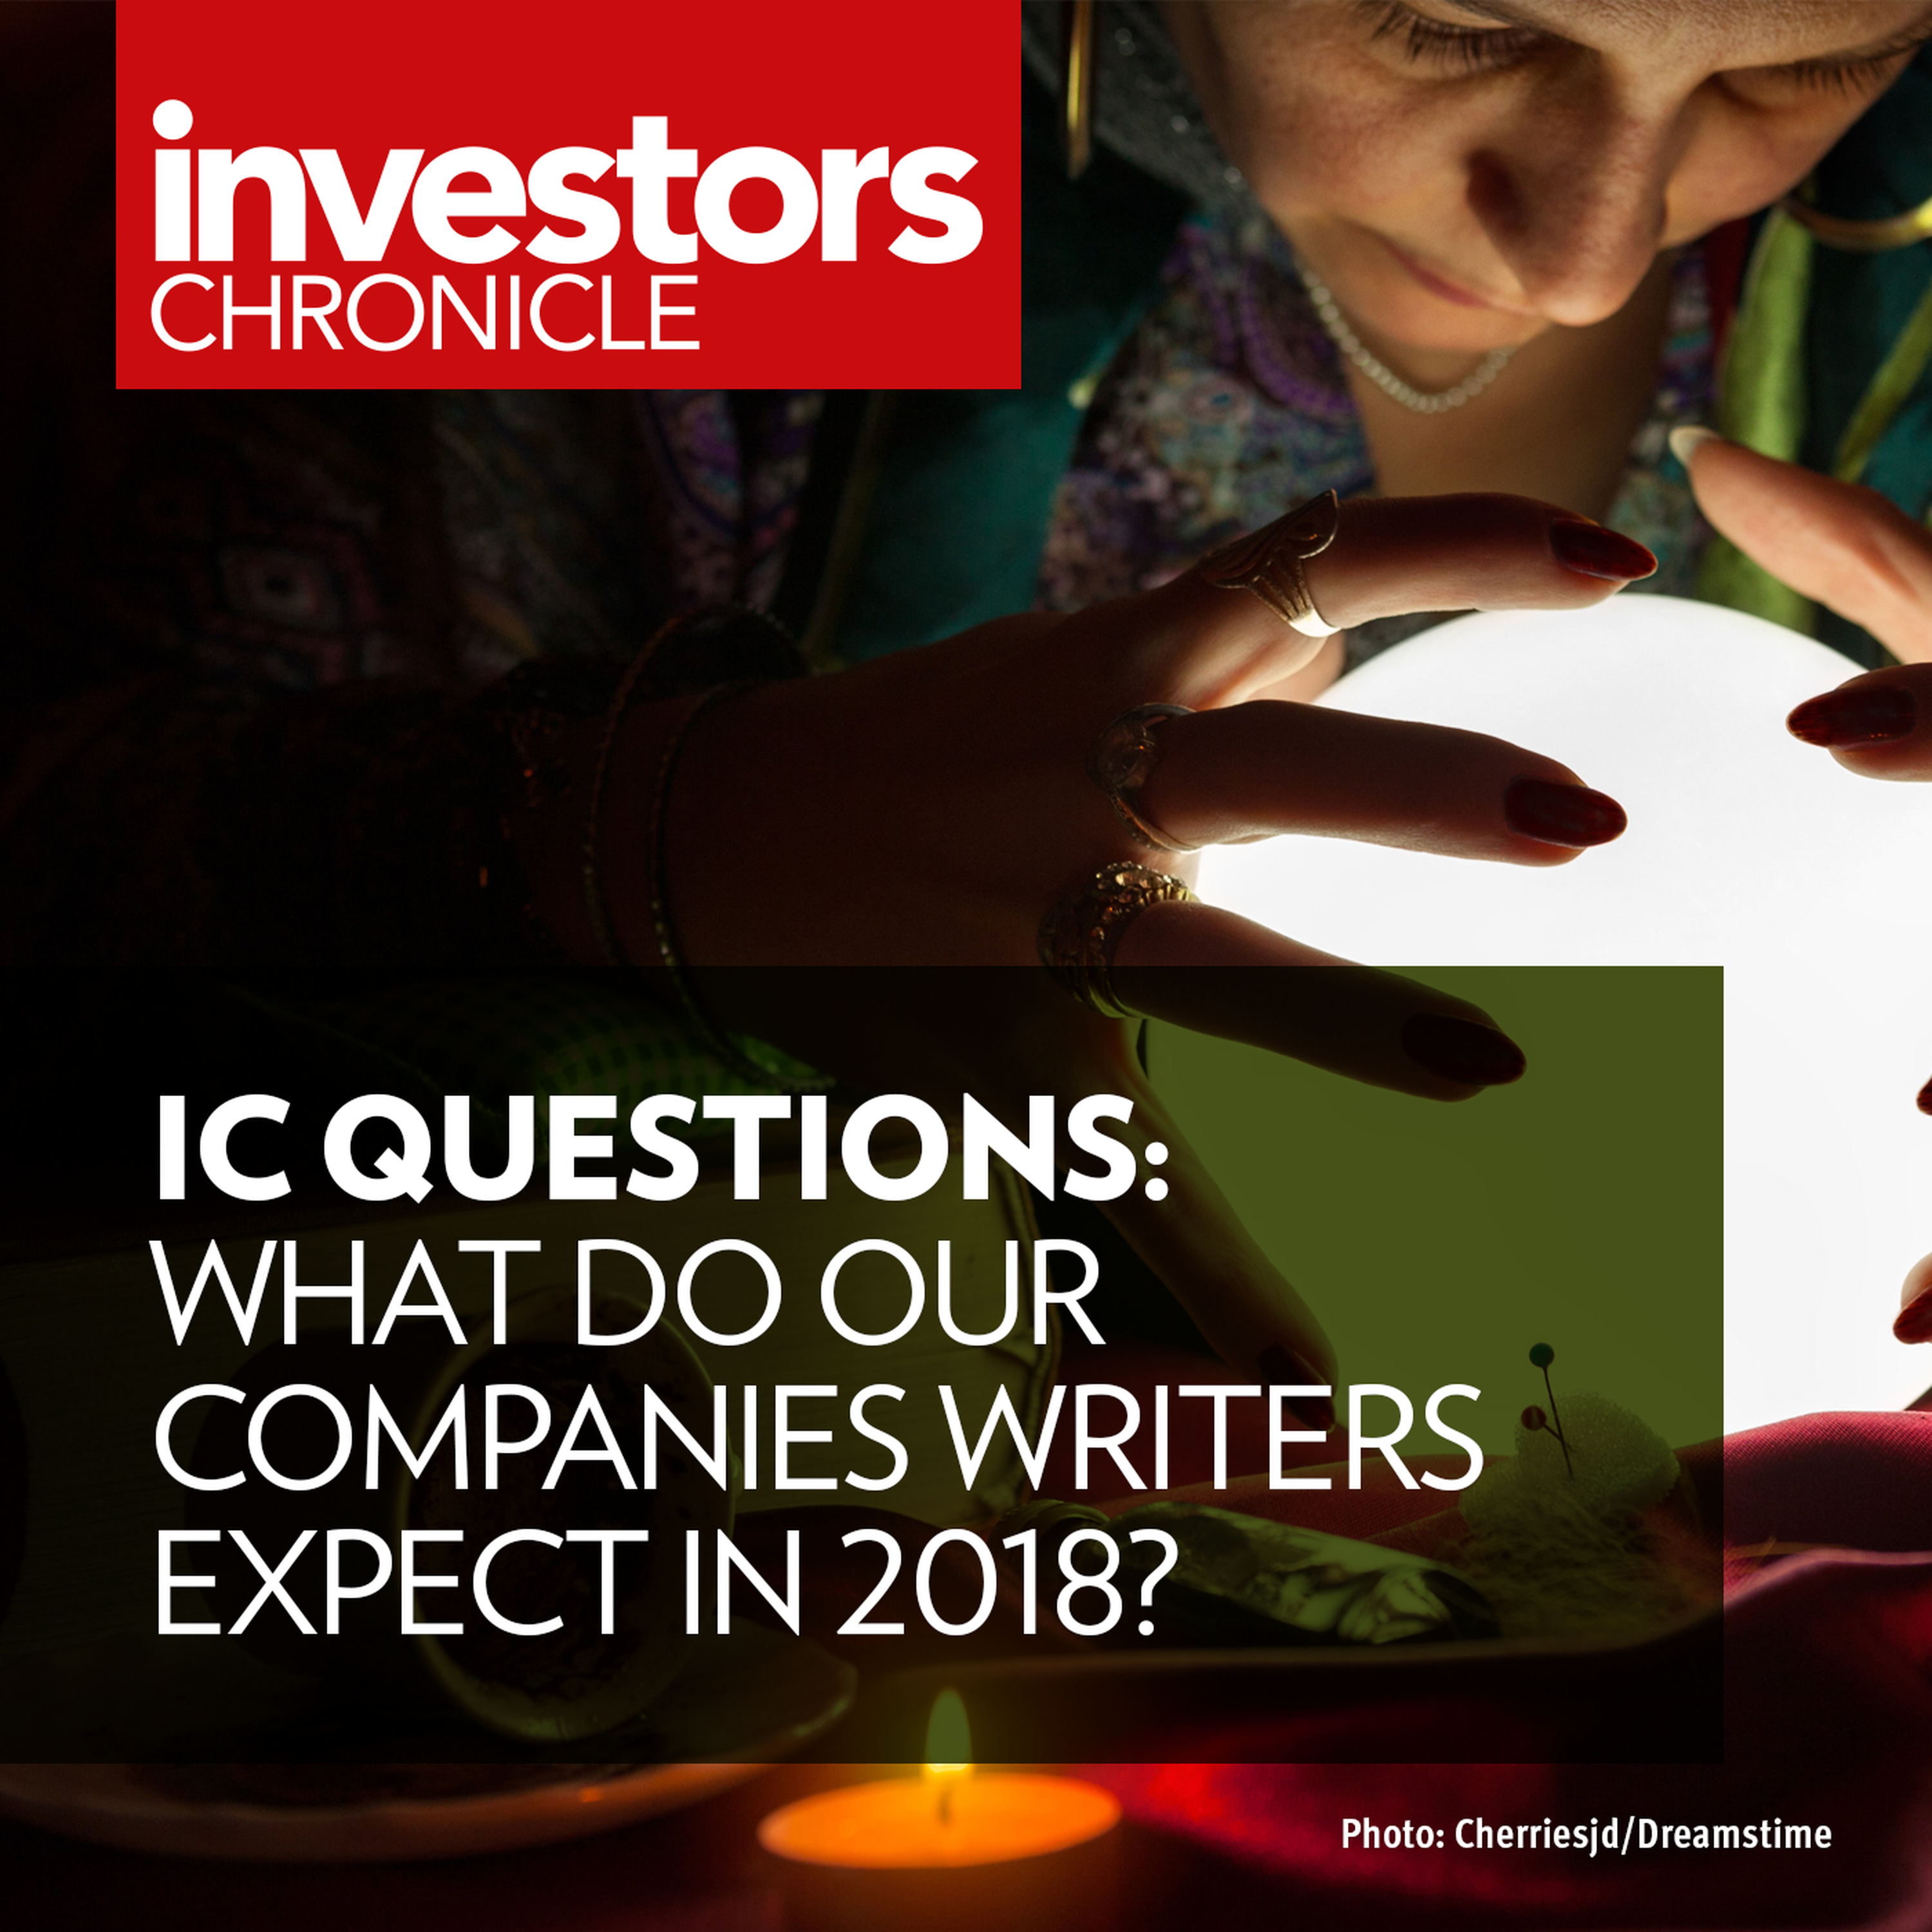 IC Questions: What do our companies writers expect in 2018?